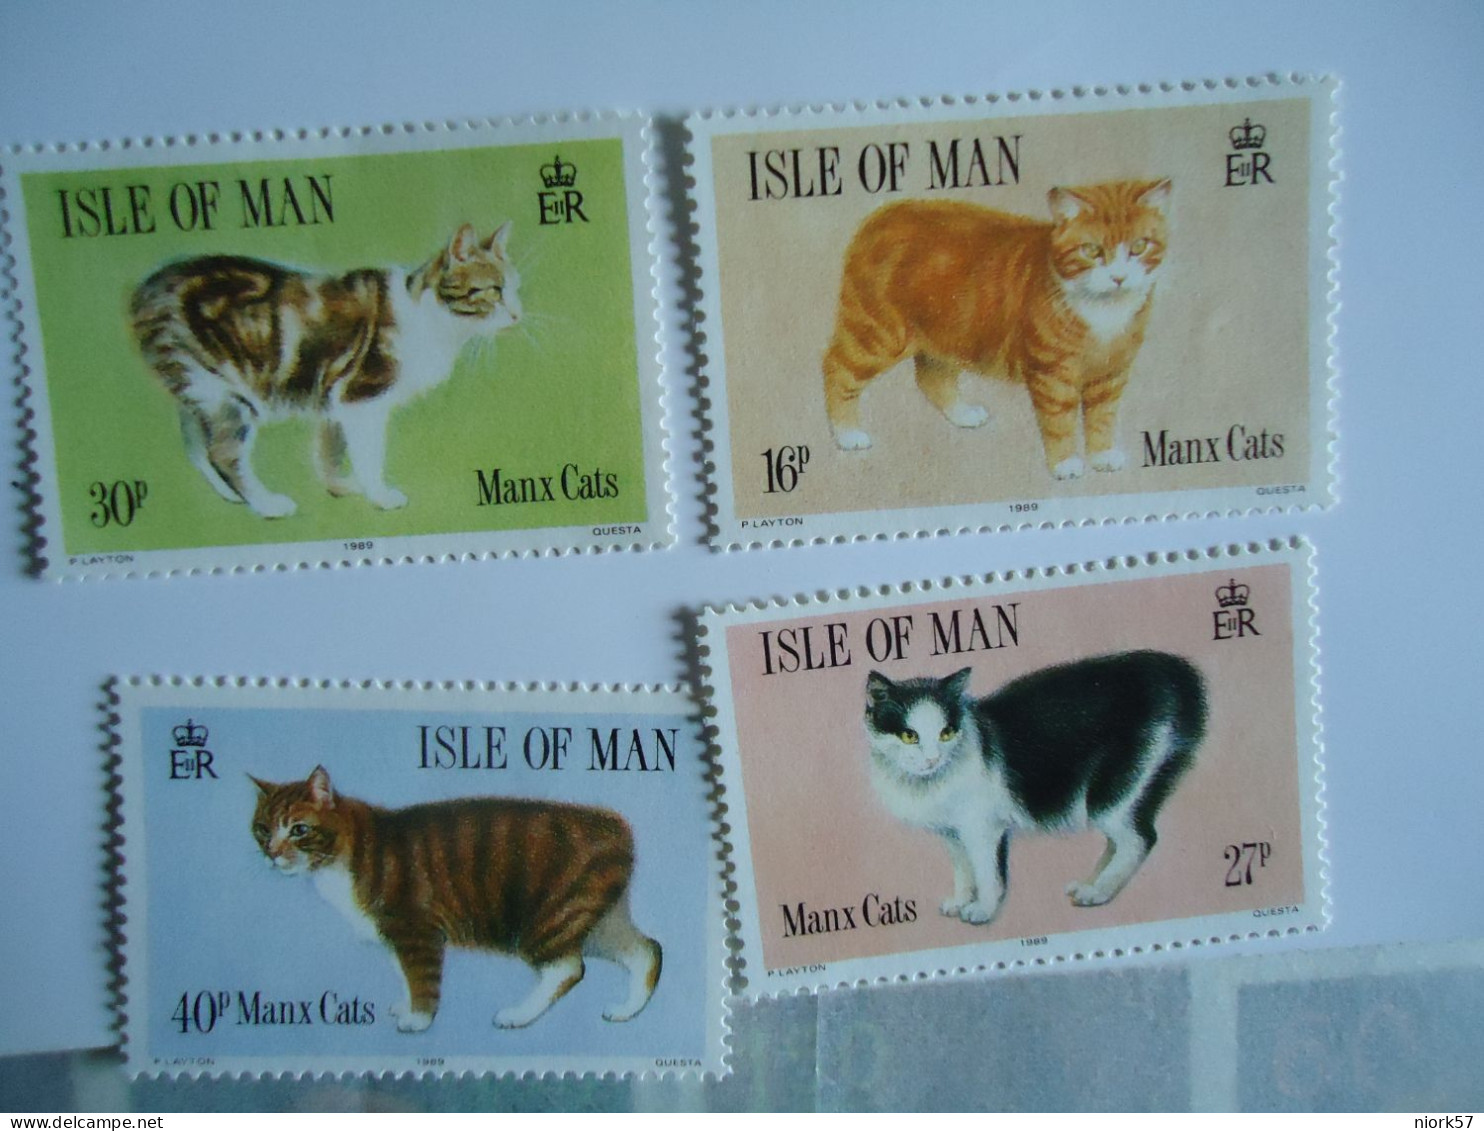 ISLE OF MAN   MNH   4  STAMPS    ANIMALS  CAT  CATS - Domestic Cats